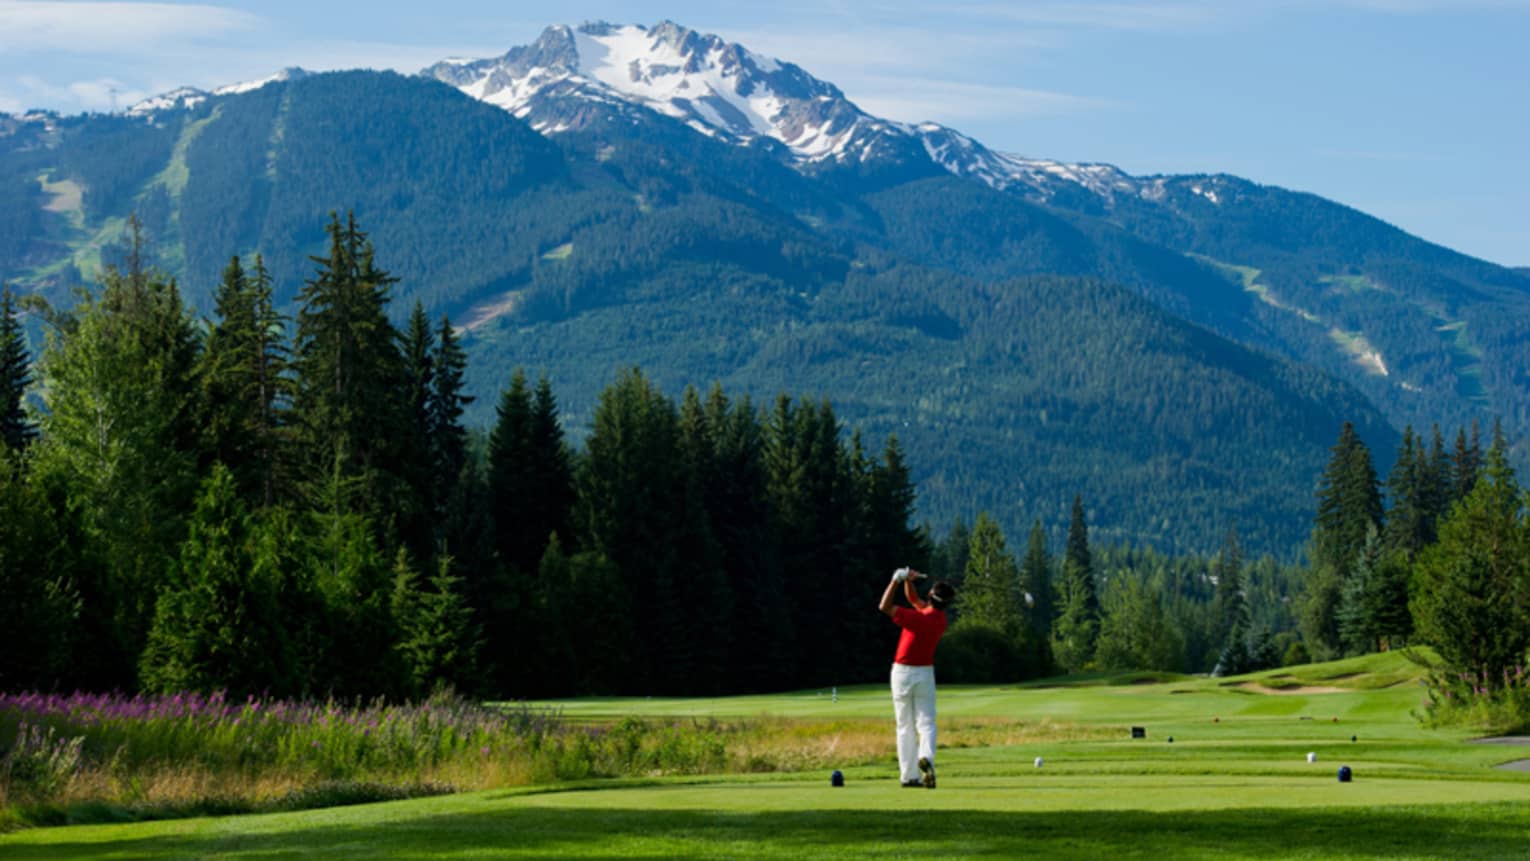 Man wearing red golf shirt swings club on green golf course surrounded by snow-capped mountains